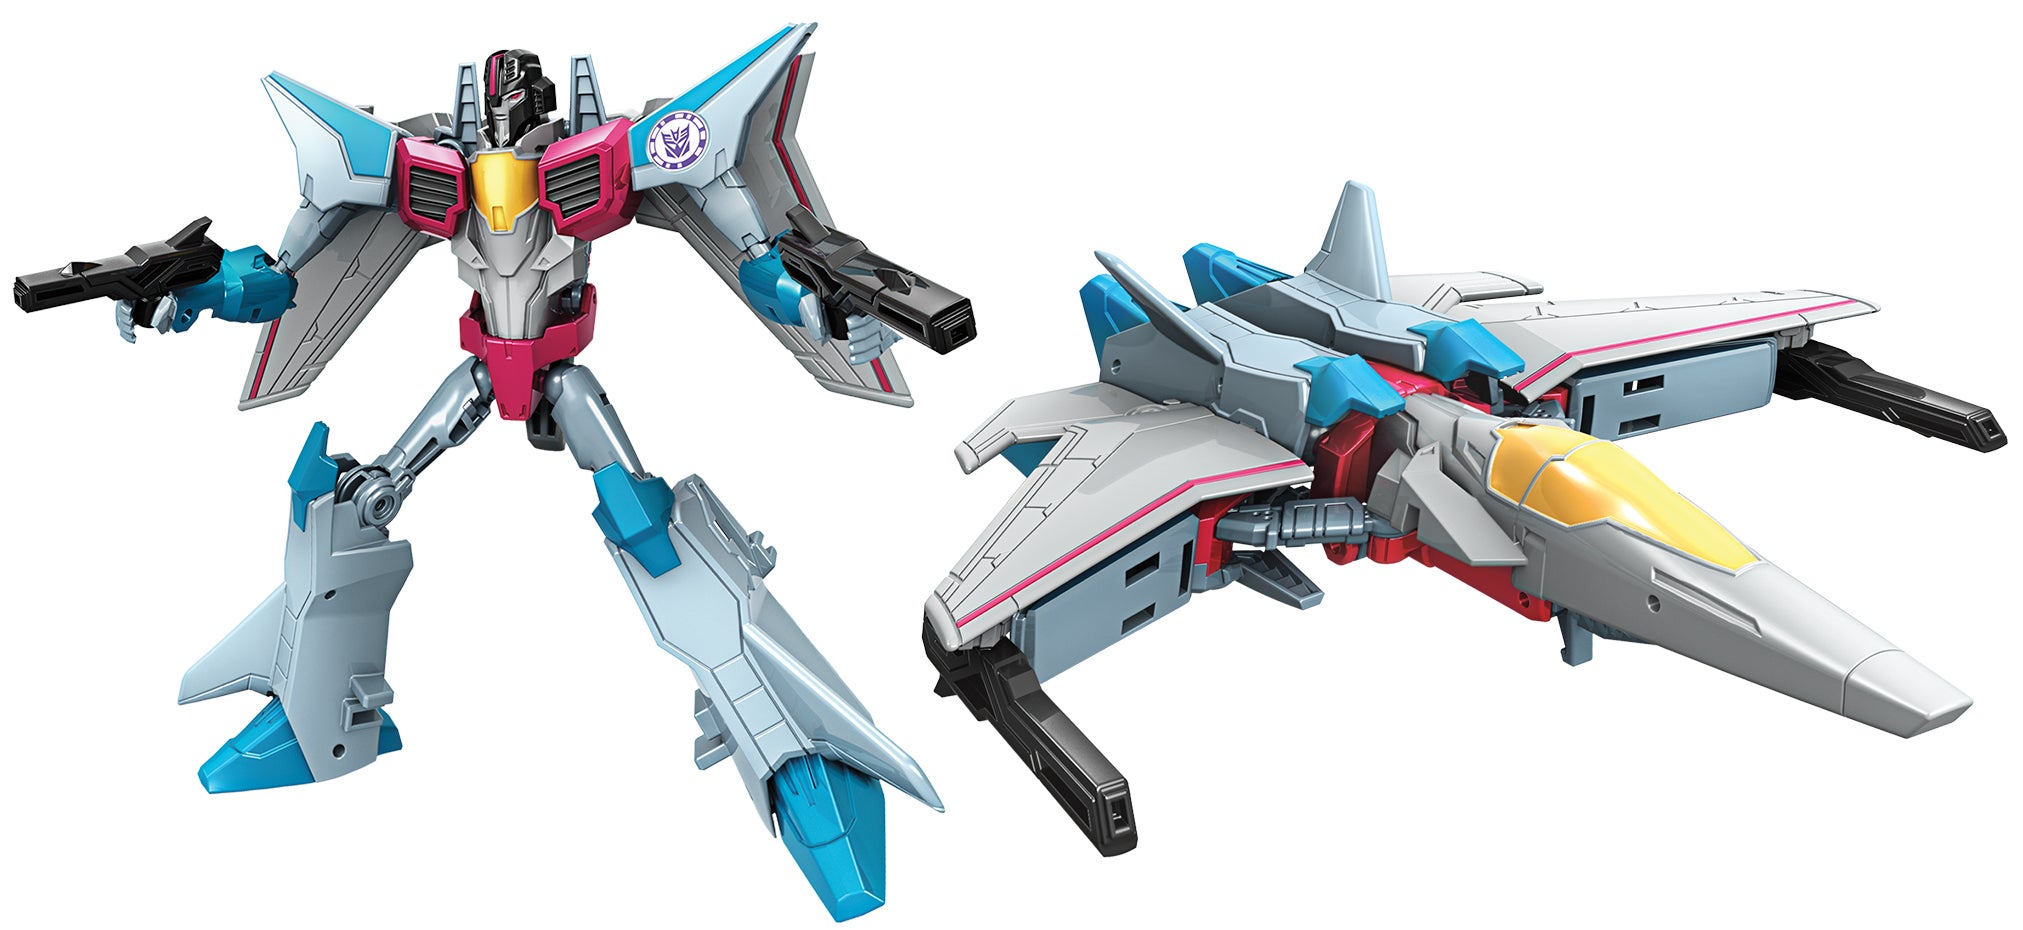 The New Robots In Disguise Toys Are Inspired By The '80s Transformers You Grew Up With